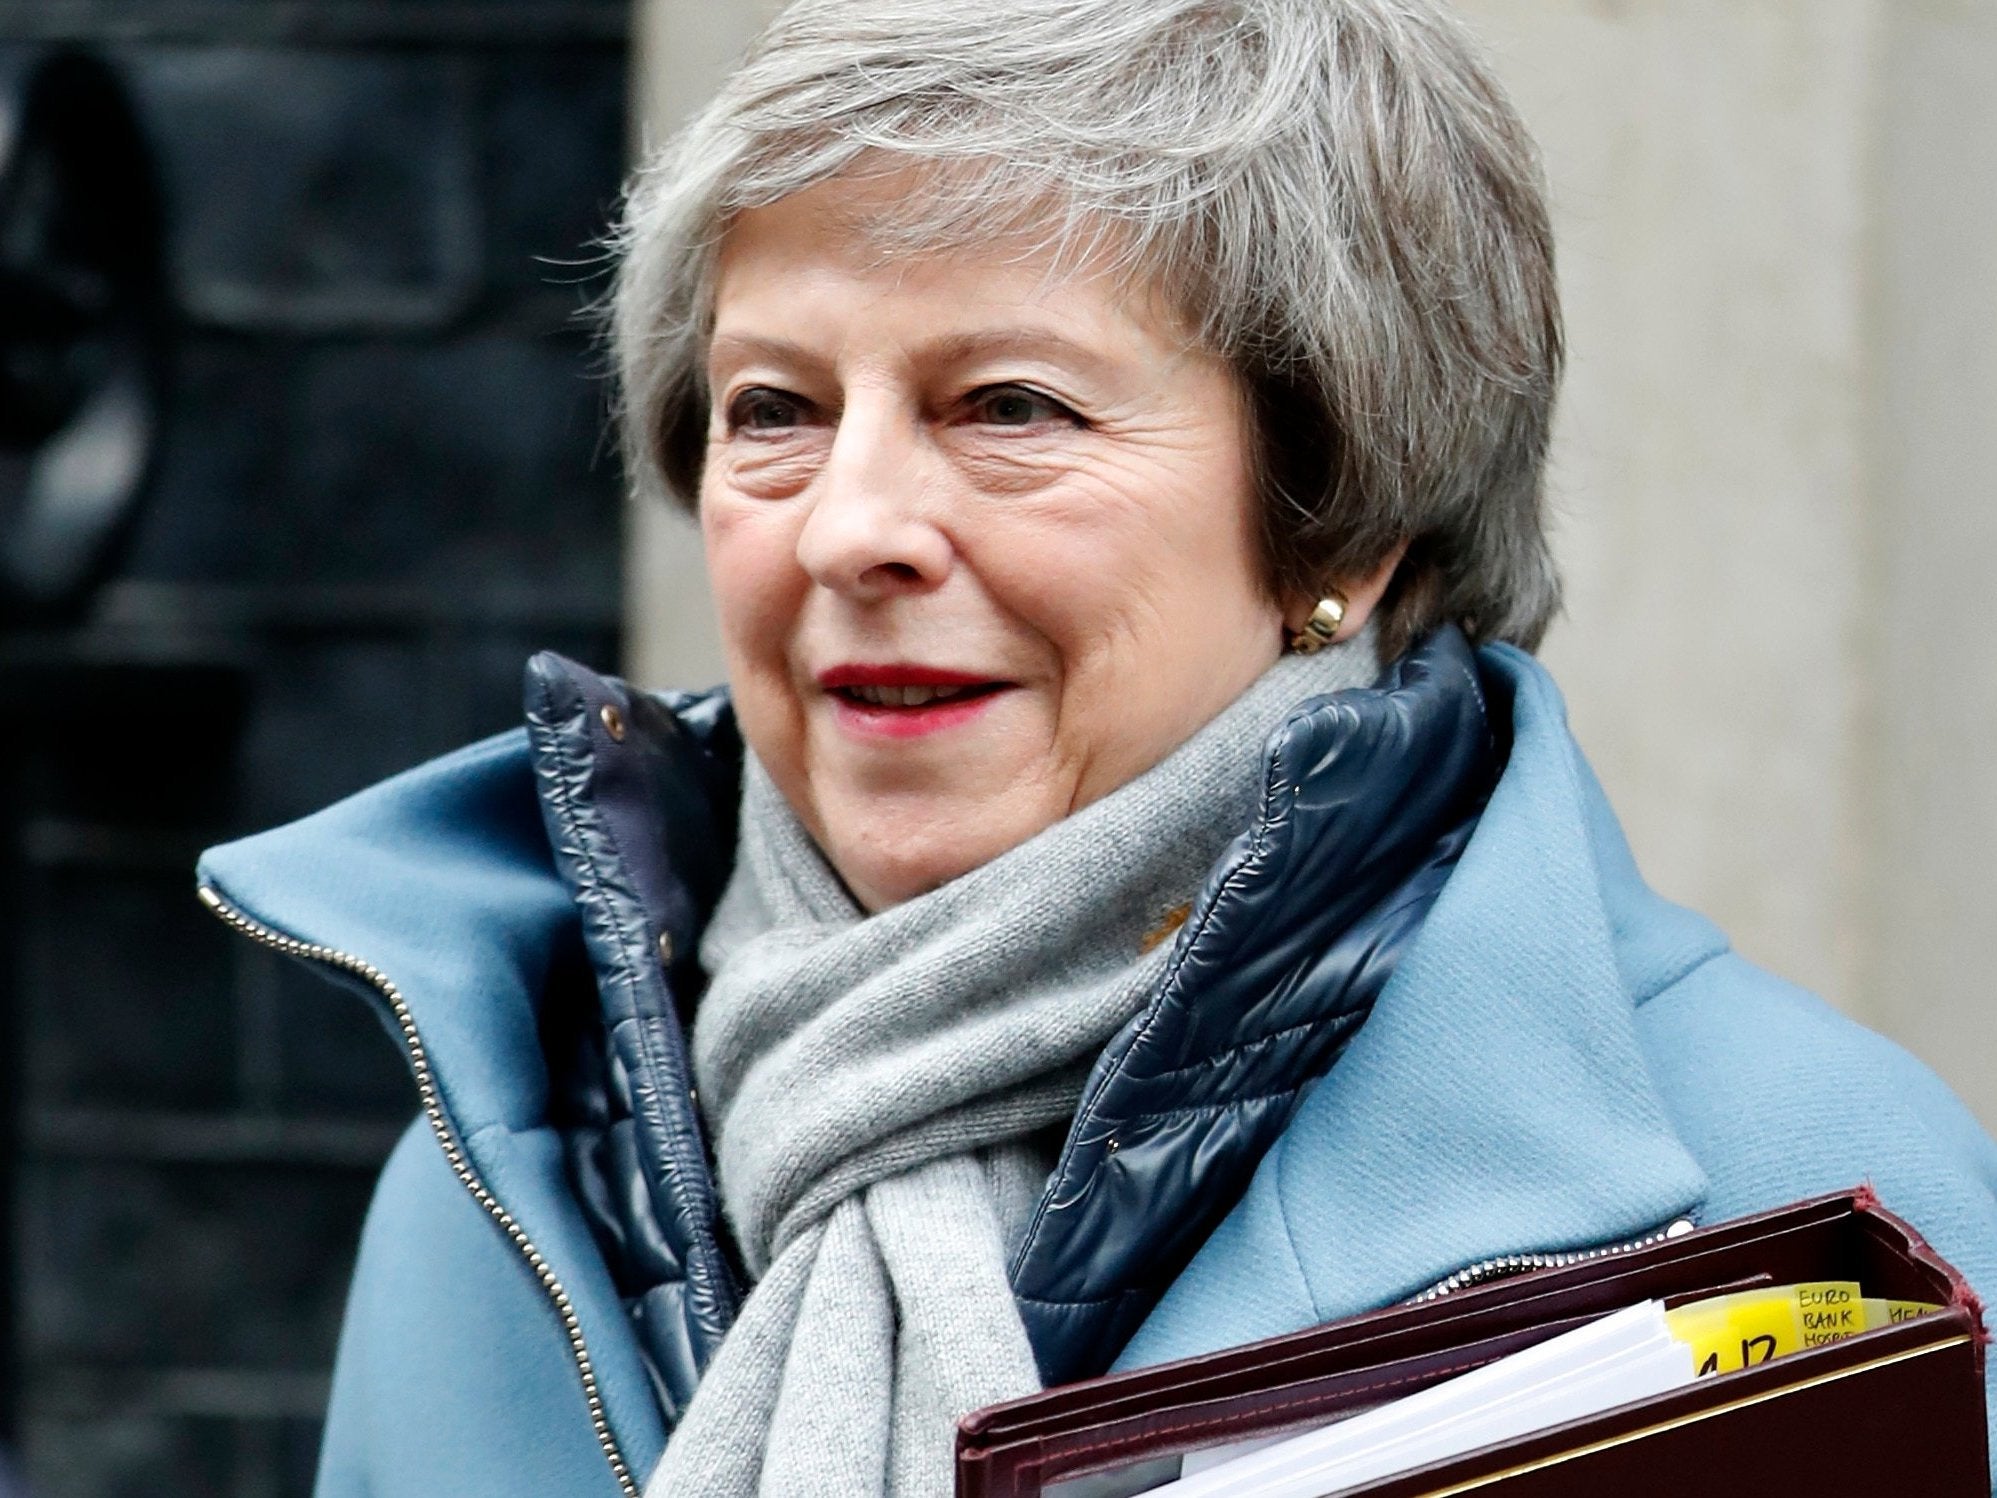 Theresa May leaves 10 Downing Street for the House of Commons for her weekly Prime Minister's question time